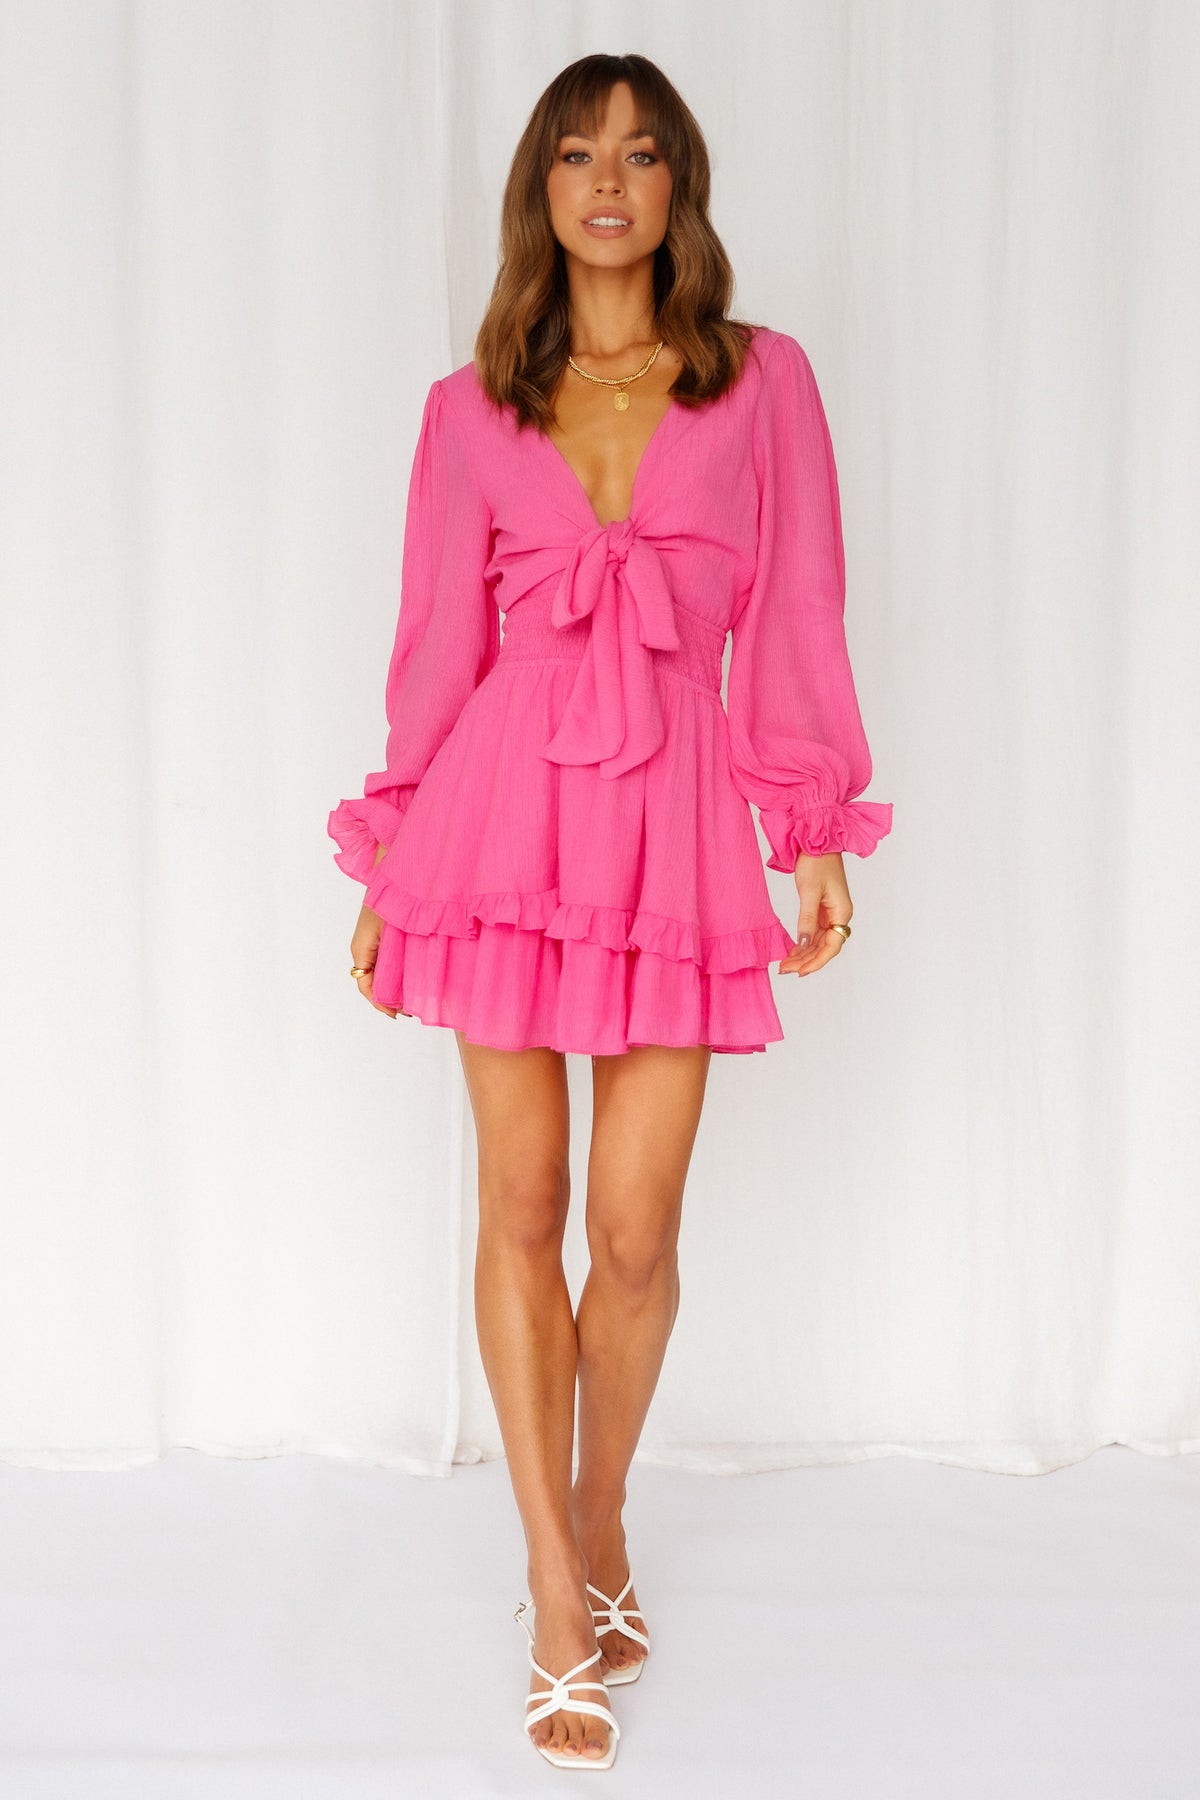 Fashion Hot Pink Deep V-Neck Tie-Up Ruffle Dress with Long Sleeve